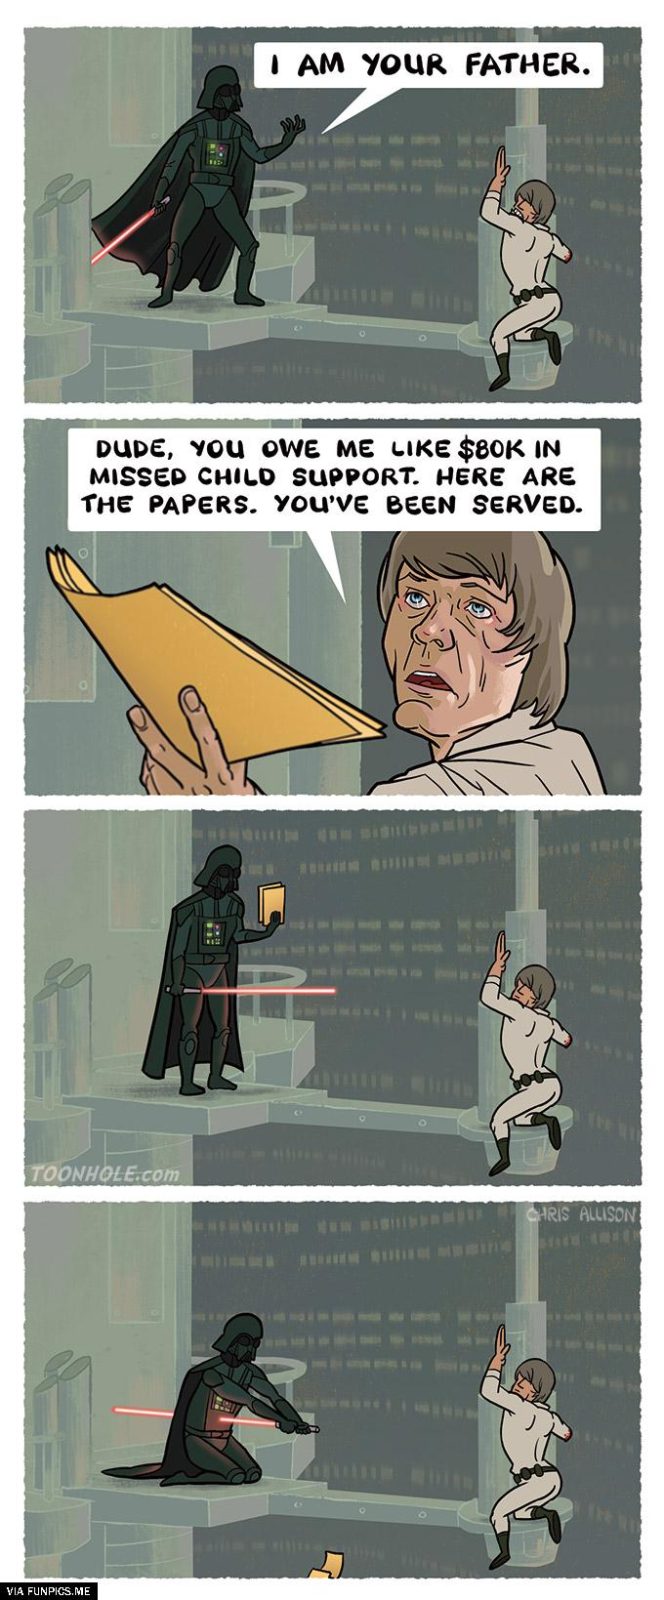 Darth Vader regrets being the father of Luke